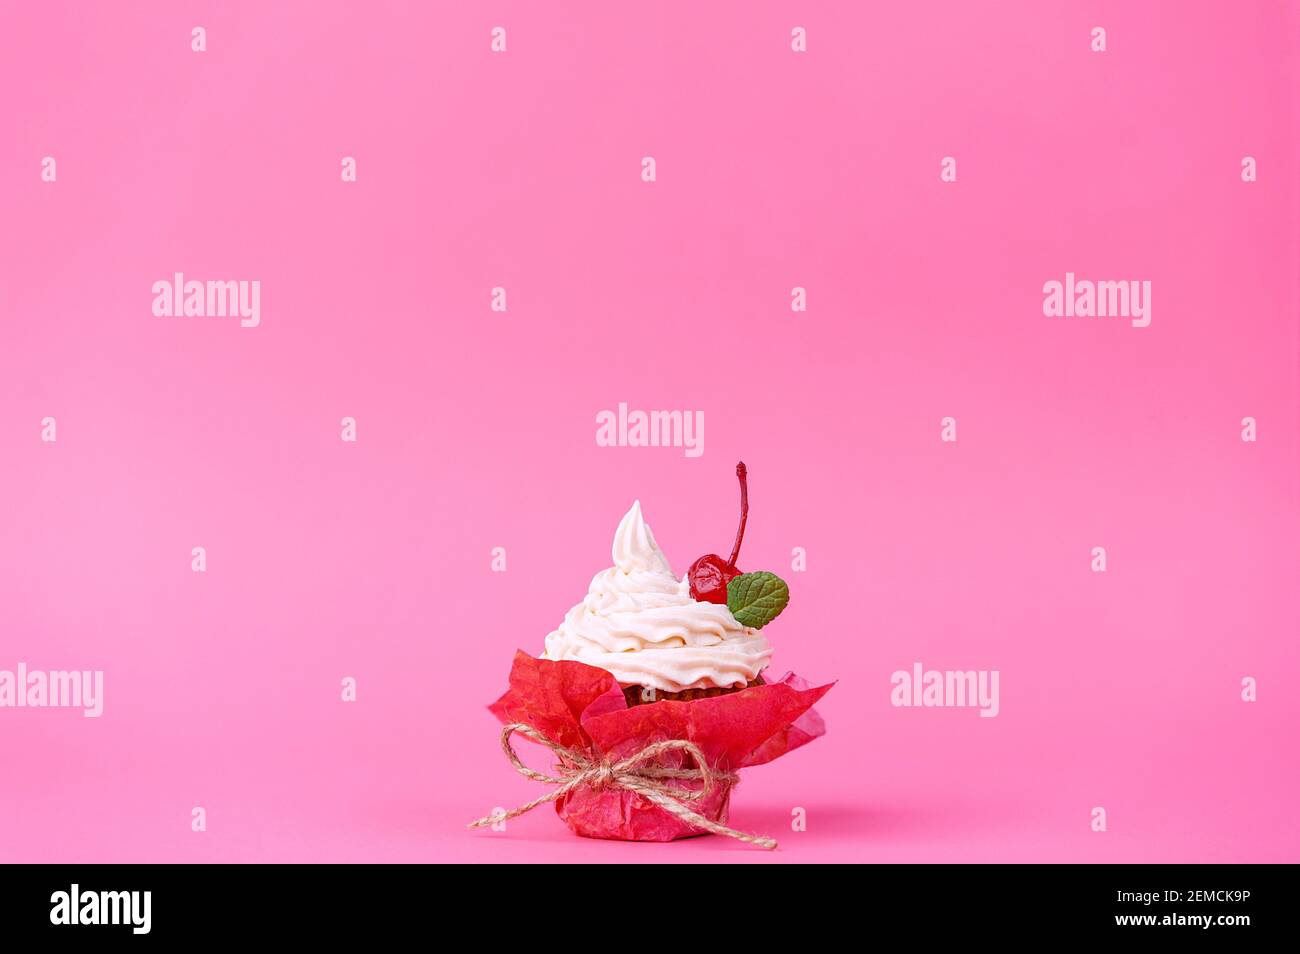 muffin with cream on a pink background. Stock Photo